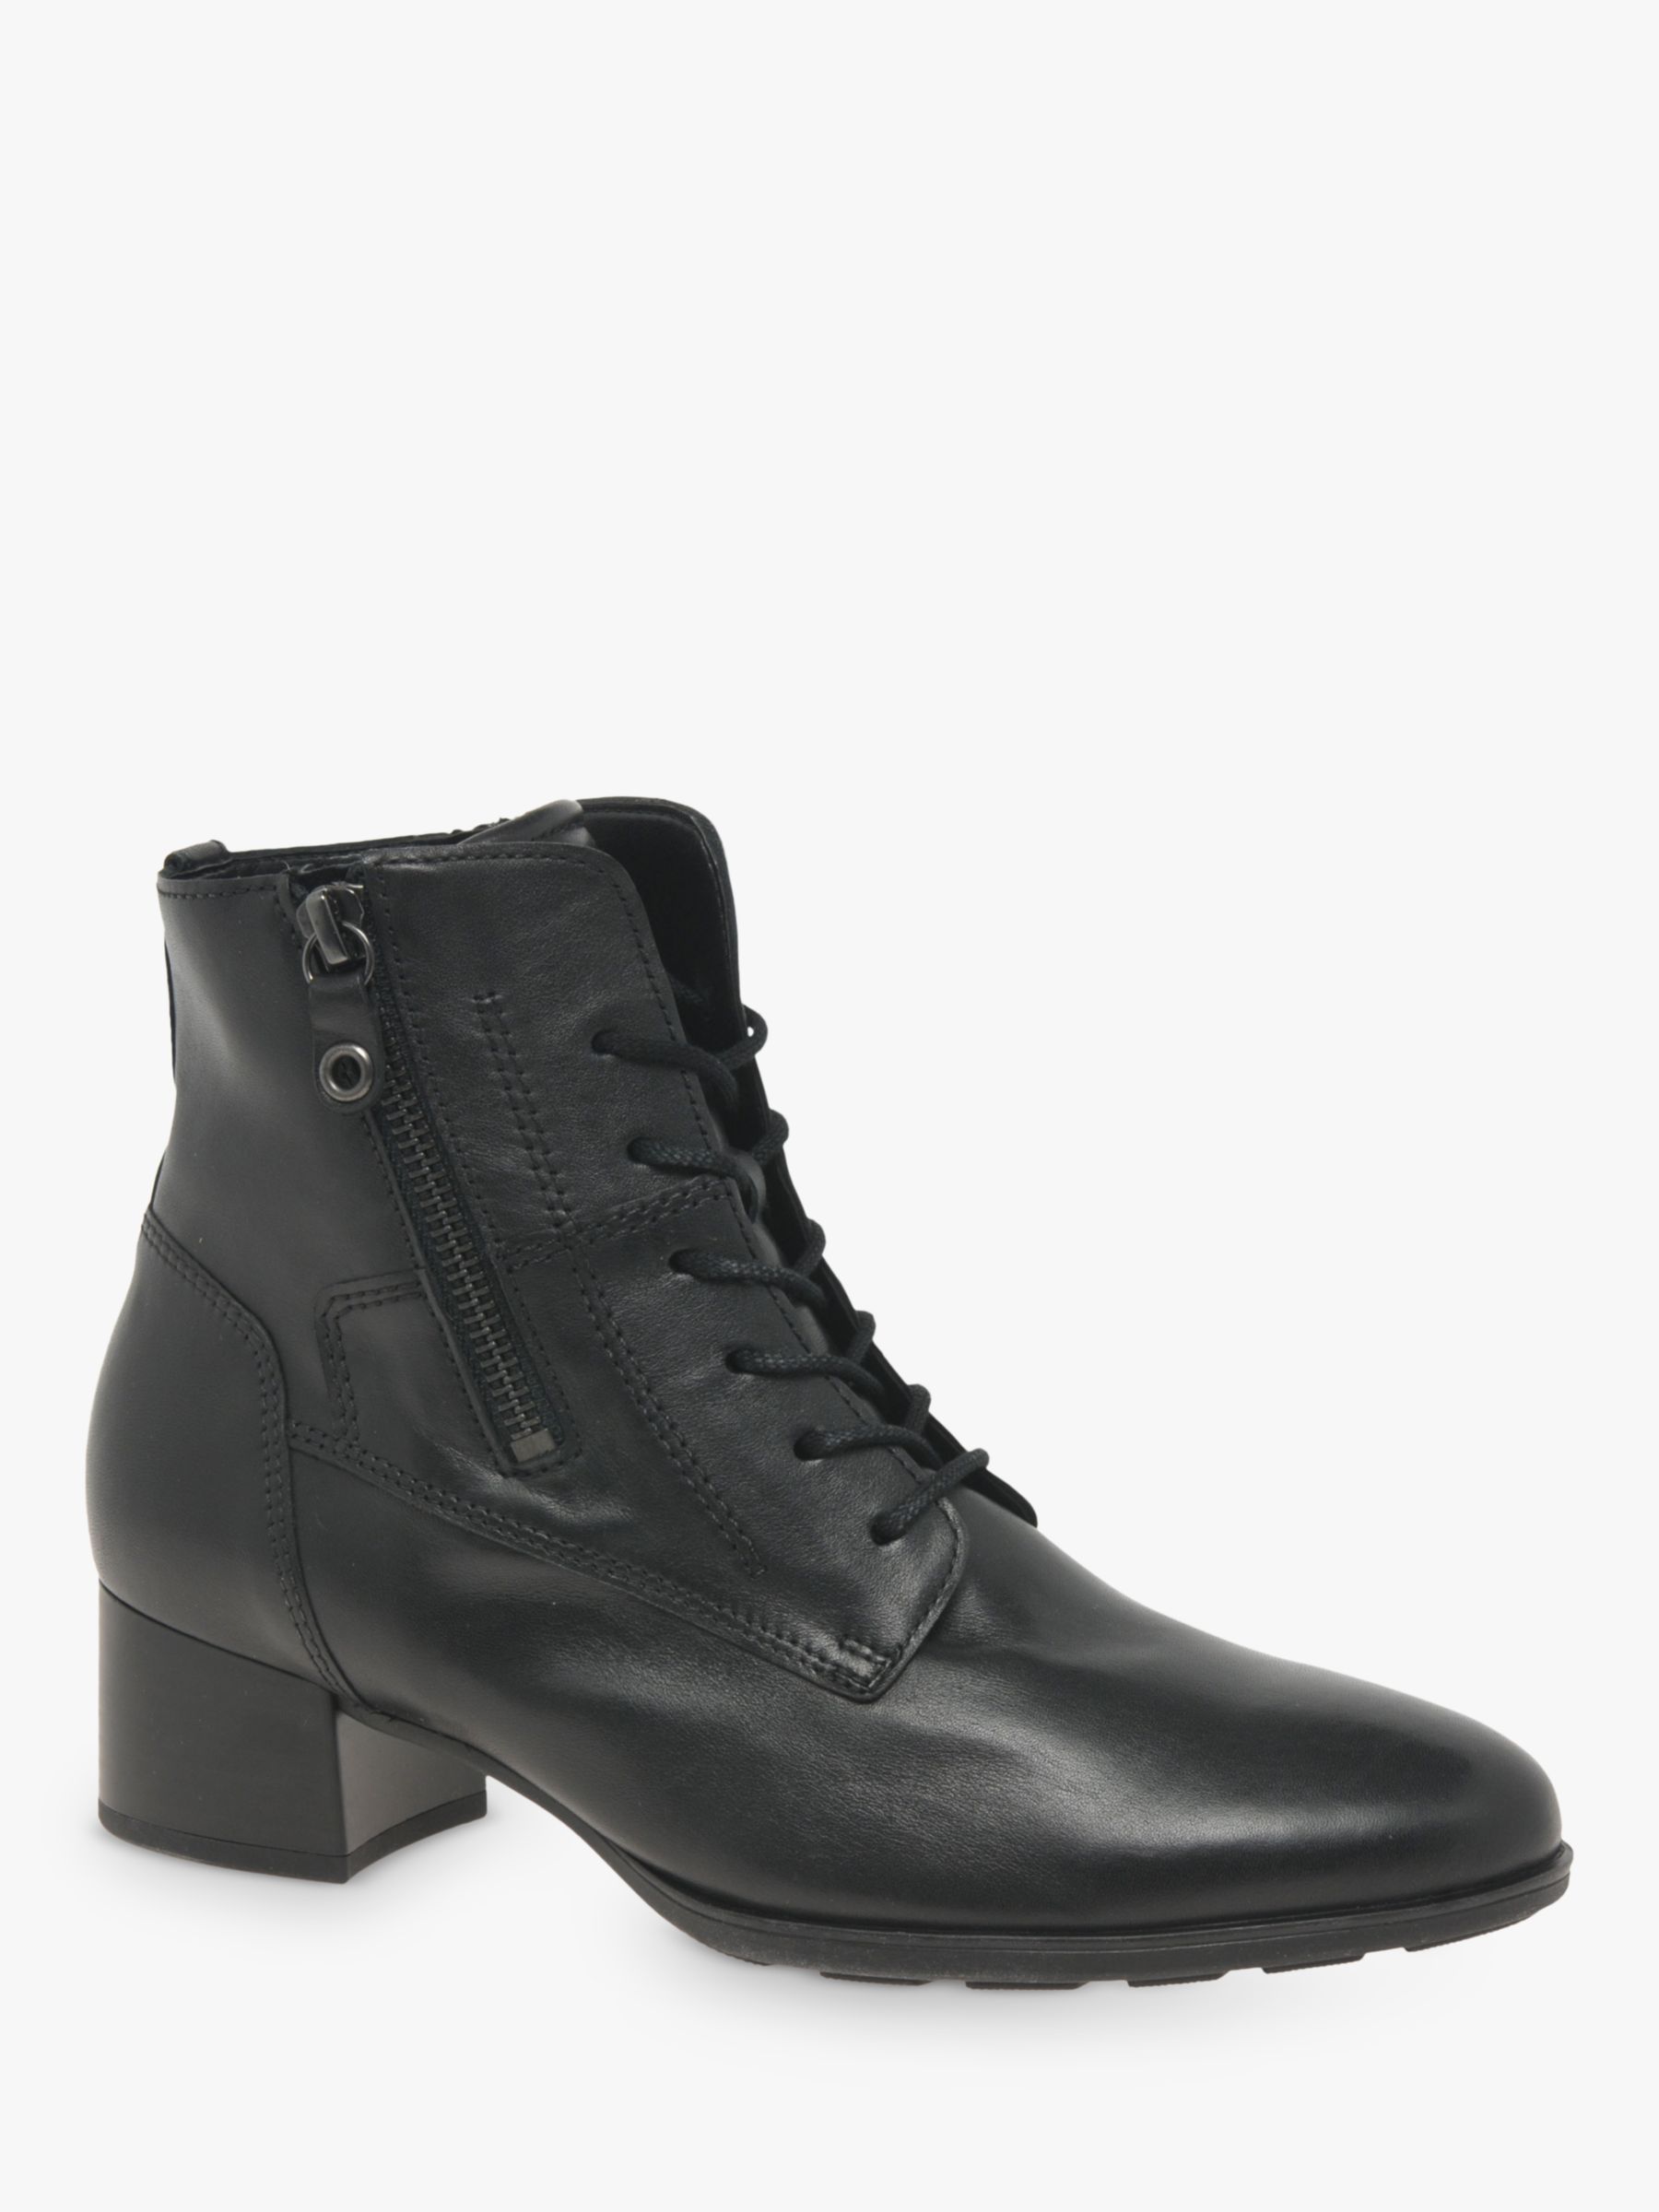 Gabor Dita Leather Ankle Boots, Black